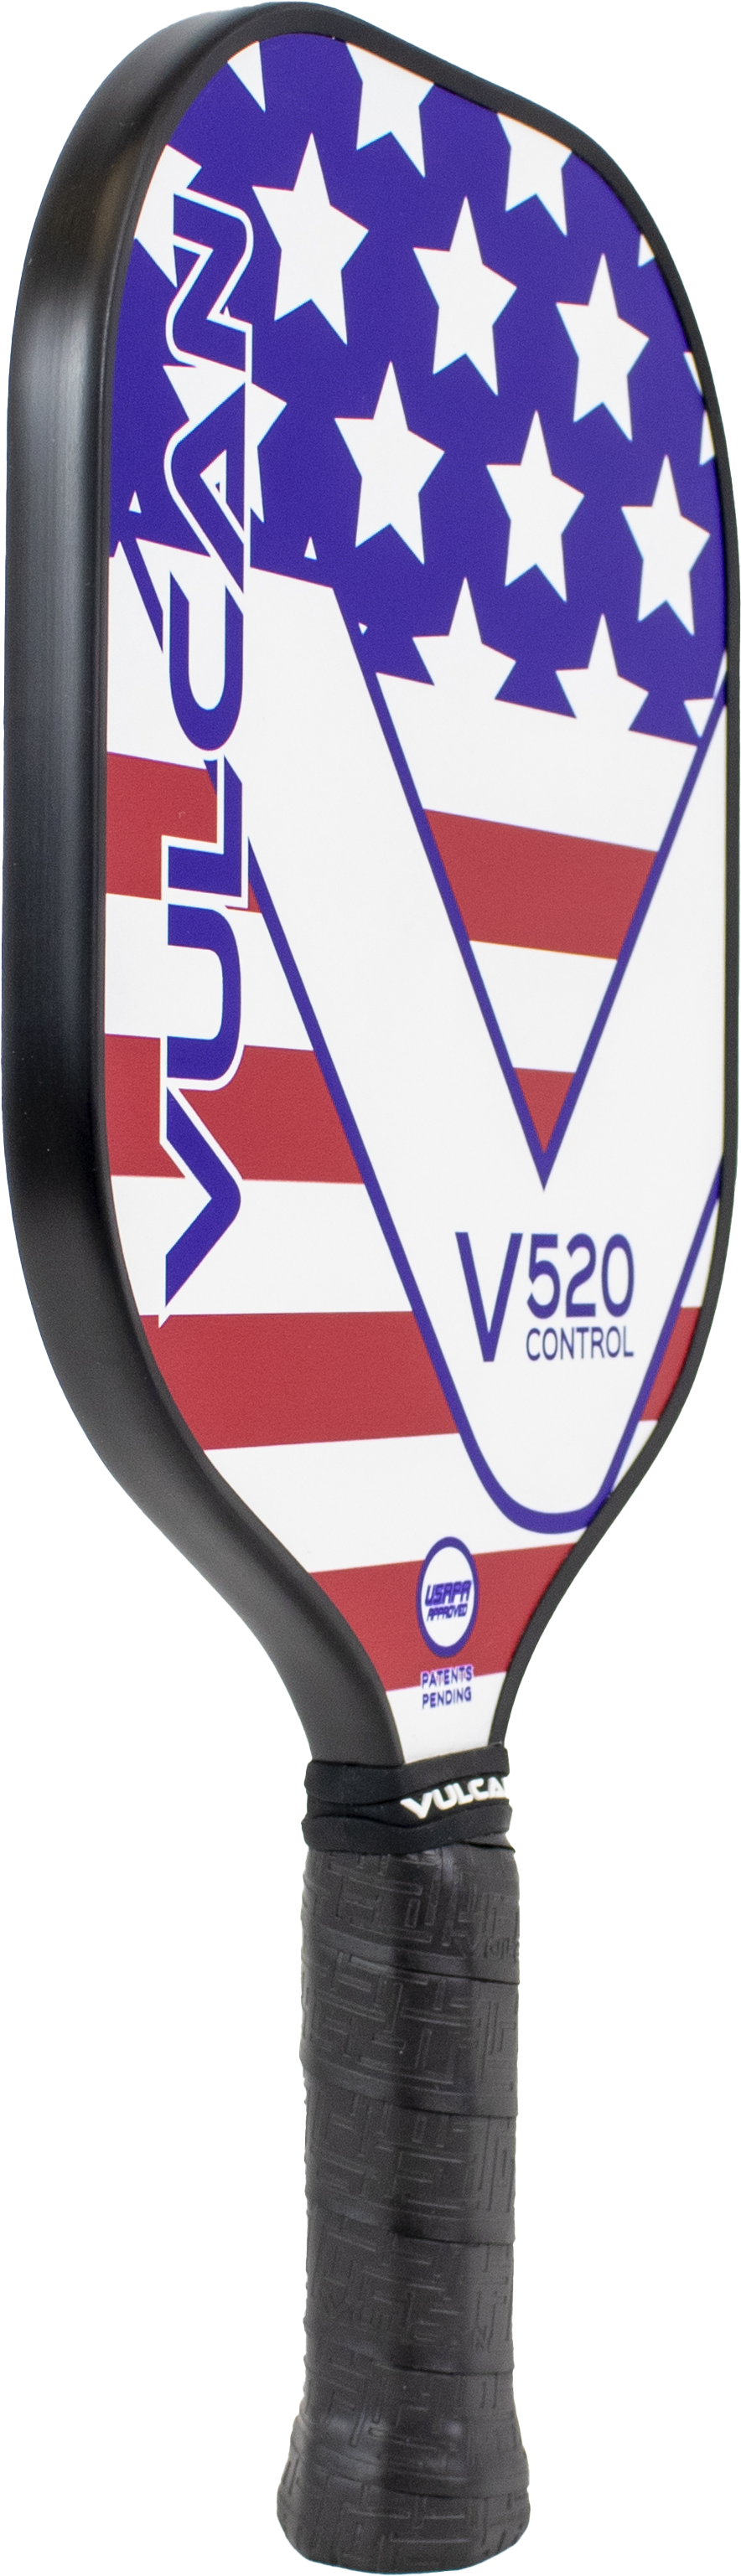 A Vulcan V520 Control Pickleball Paddle with an Americana design.